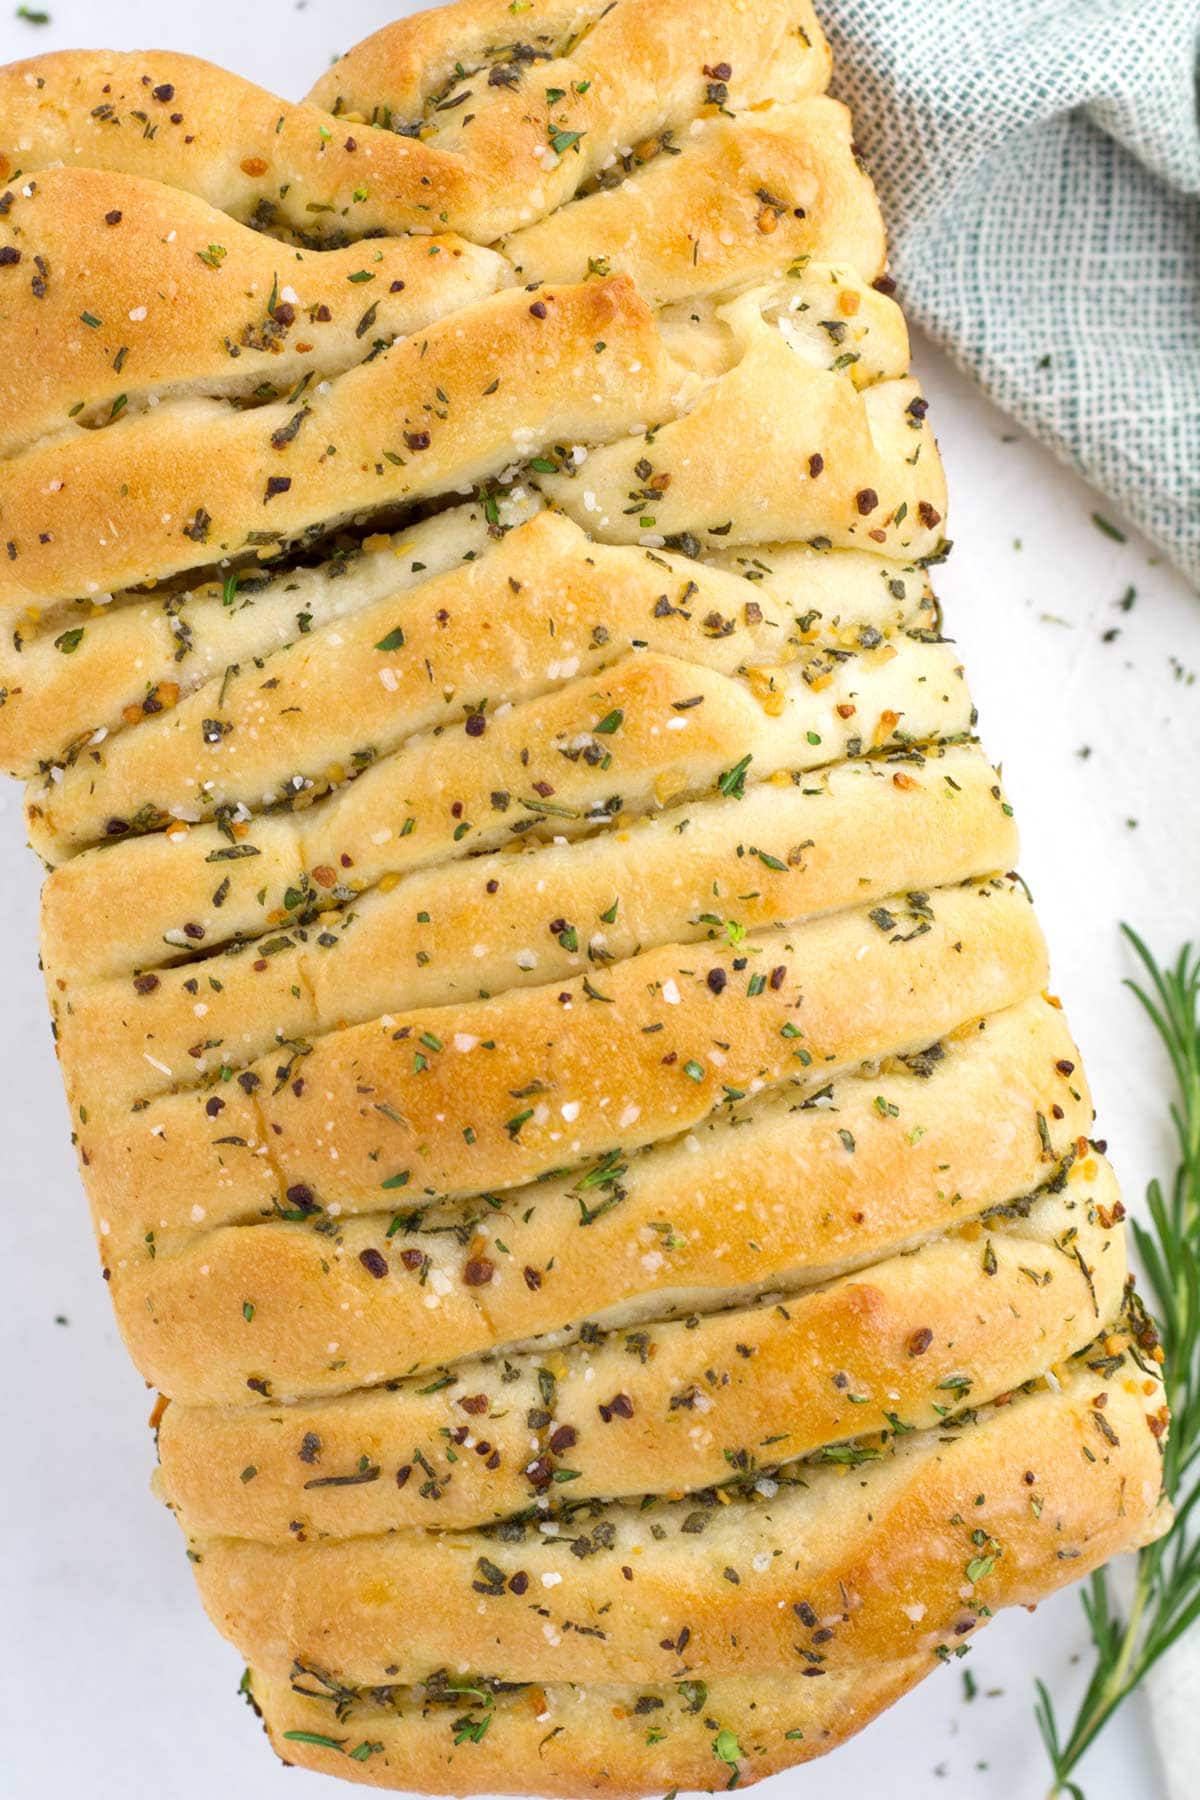 Golden brown loaf of savory pull apart bread with fresh rosemary on the side.